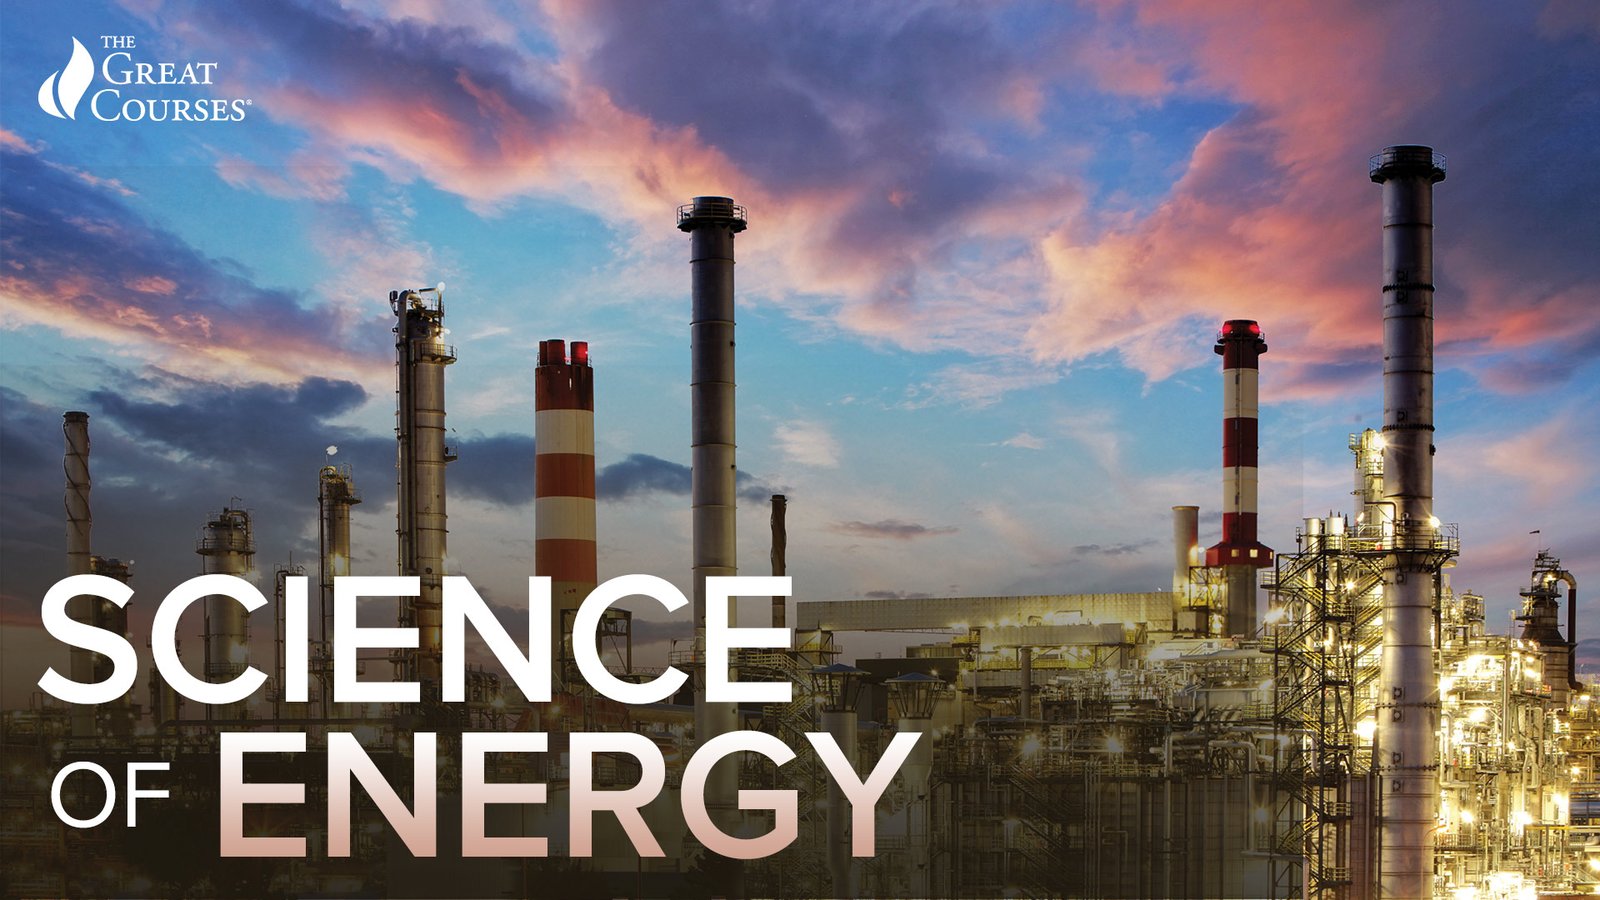 The Science of Energy - Resources and Power Explained